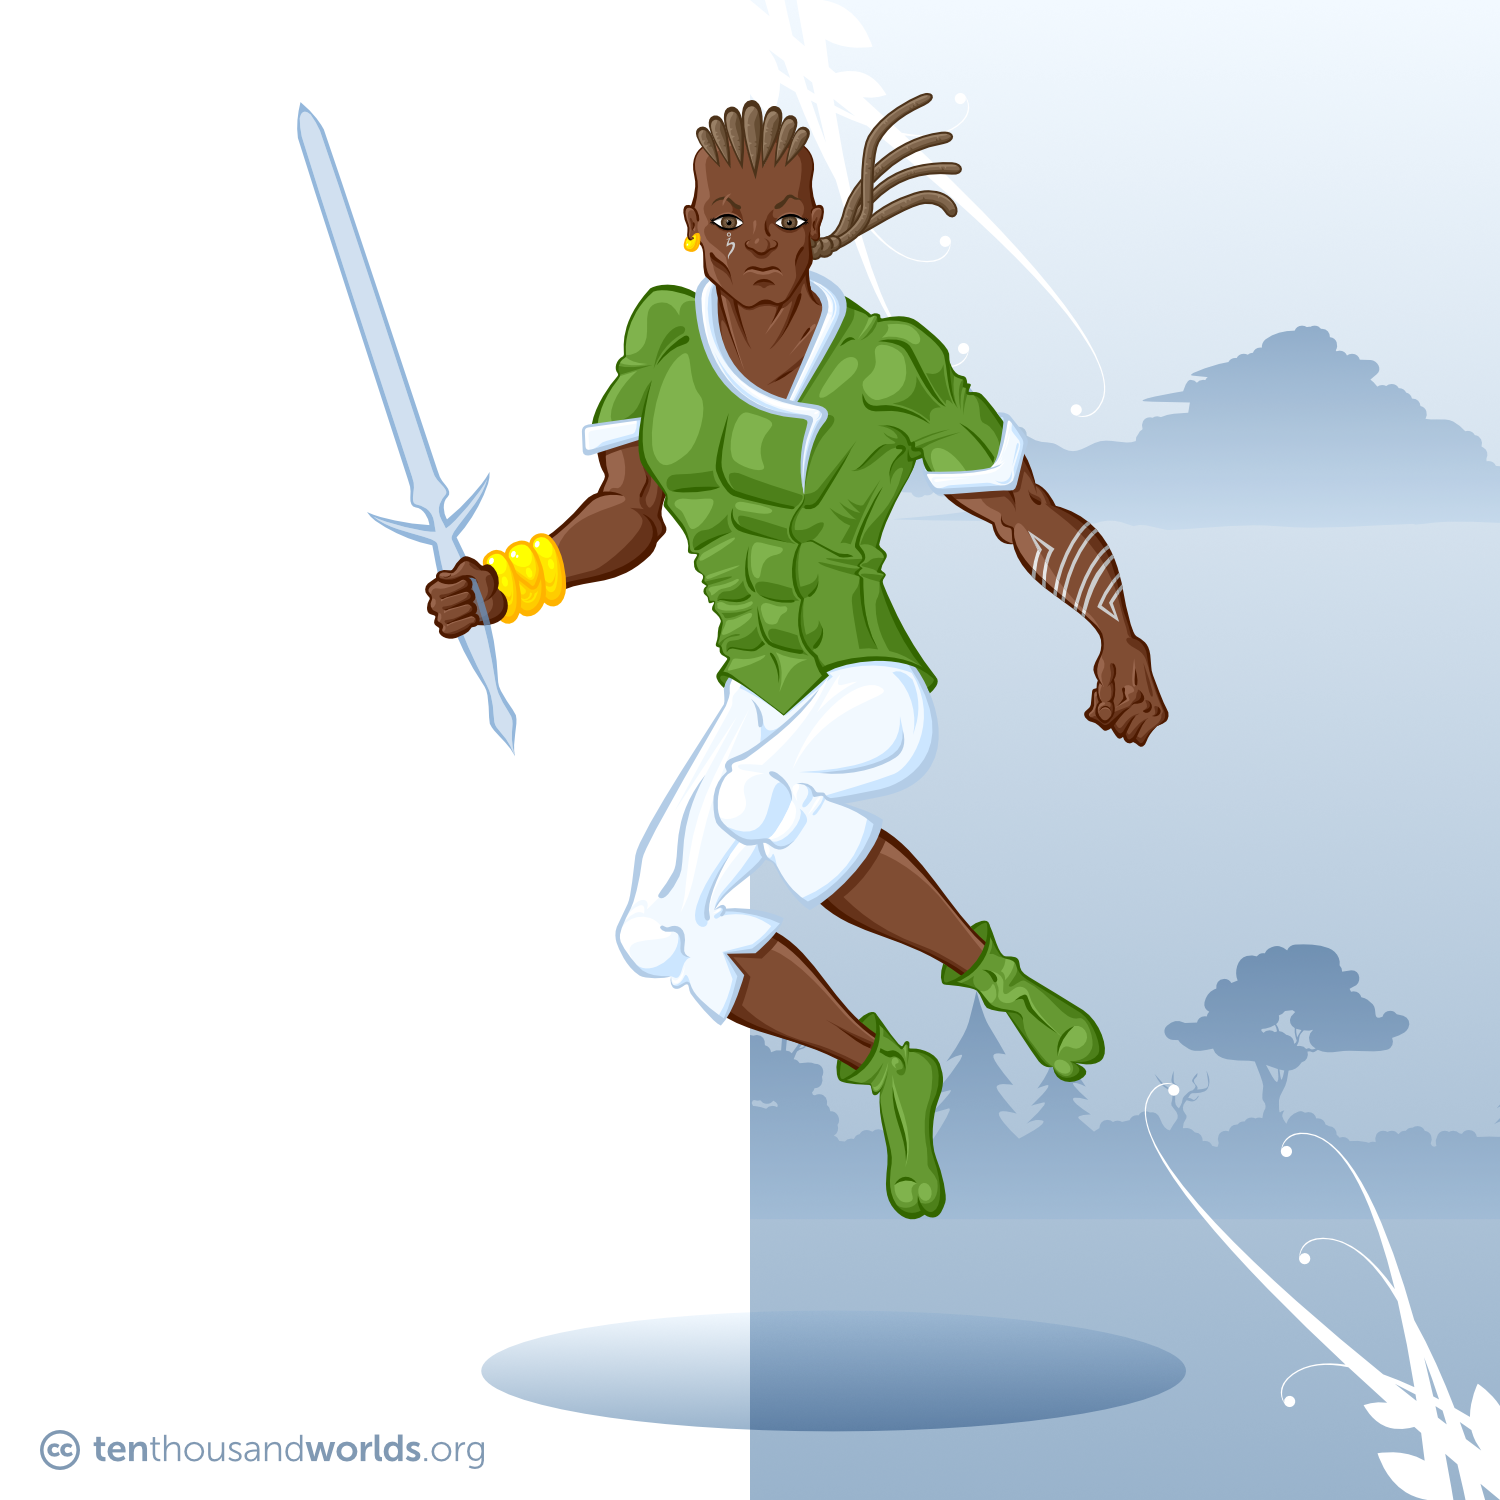 A man in mid-leap holding a transparent sword. He wears knee-length white trousers and a green asymmetrical short-sleeved shirt. Silvery facial and forearm tattoos adorn his brown skin, the sides of his head are shaved, and the rest of his hair is styled into long braids which fly out behind him.